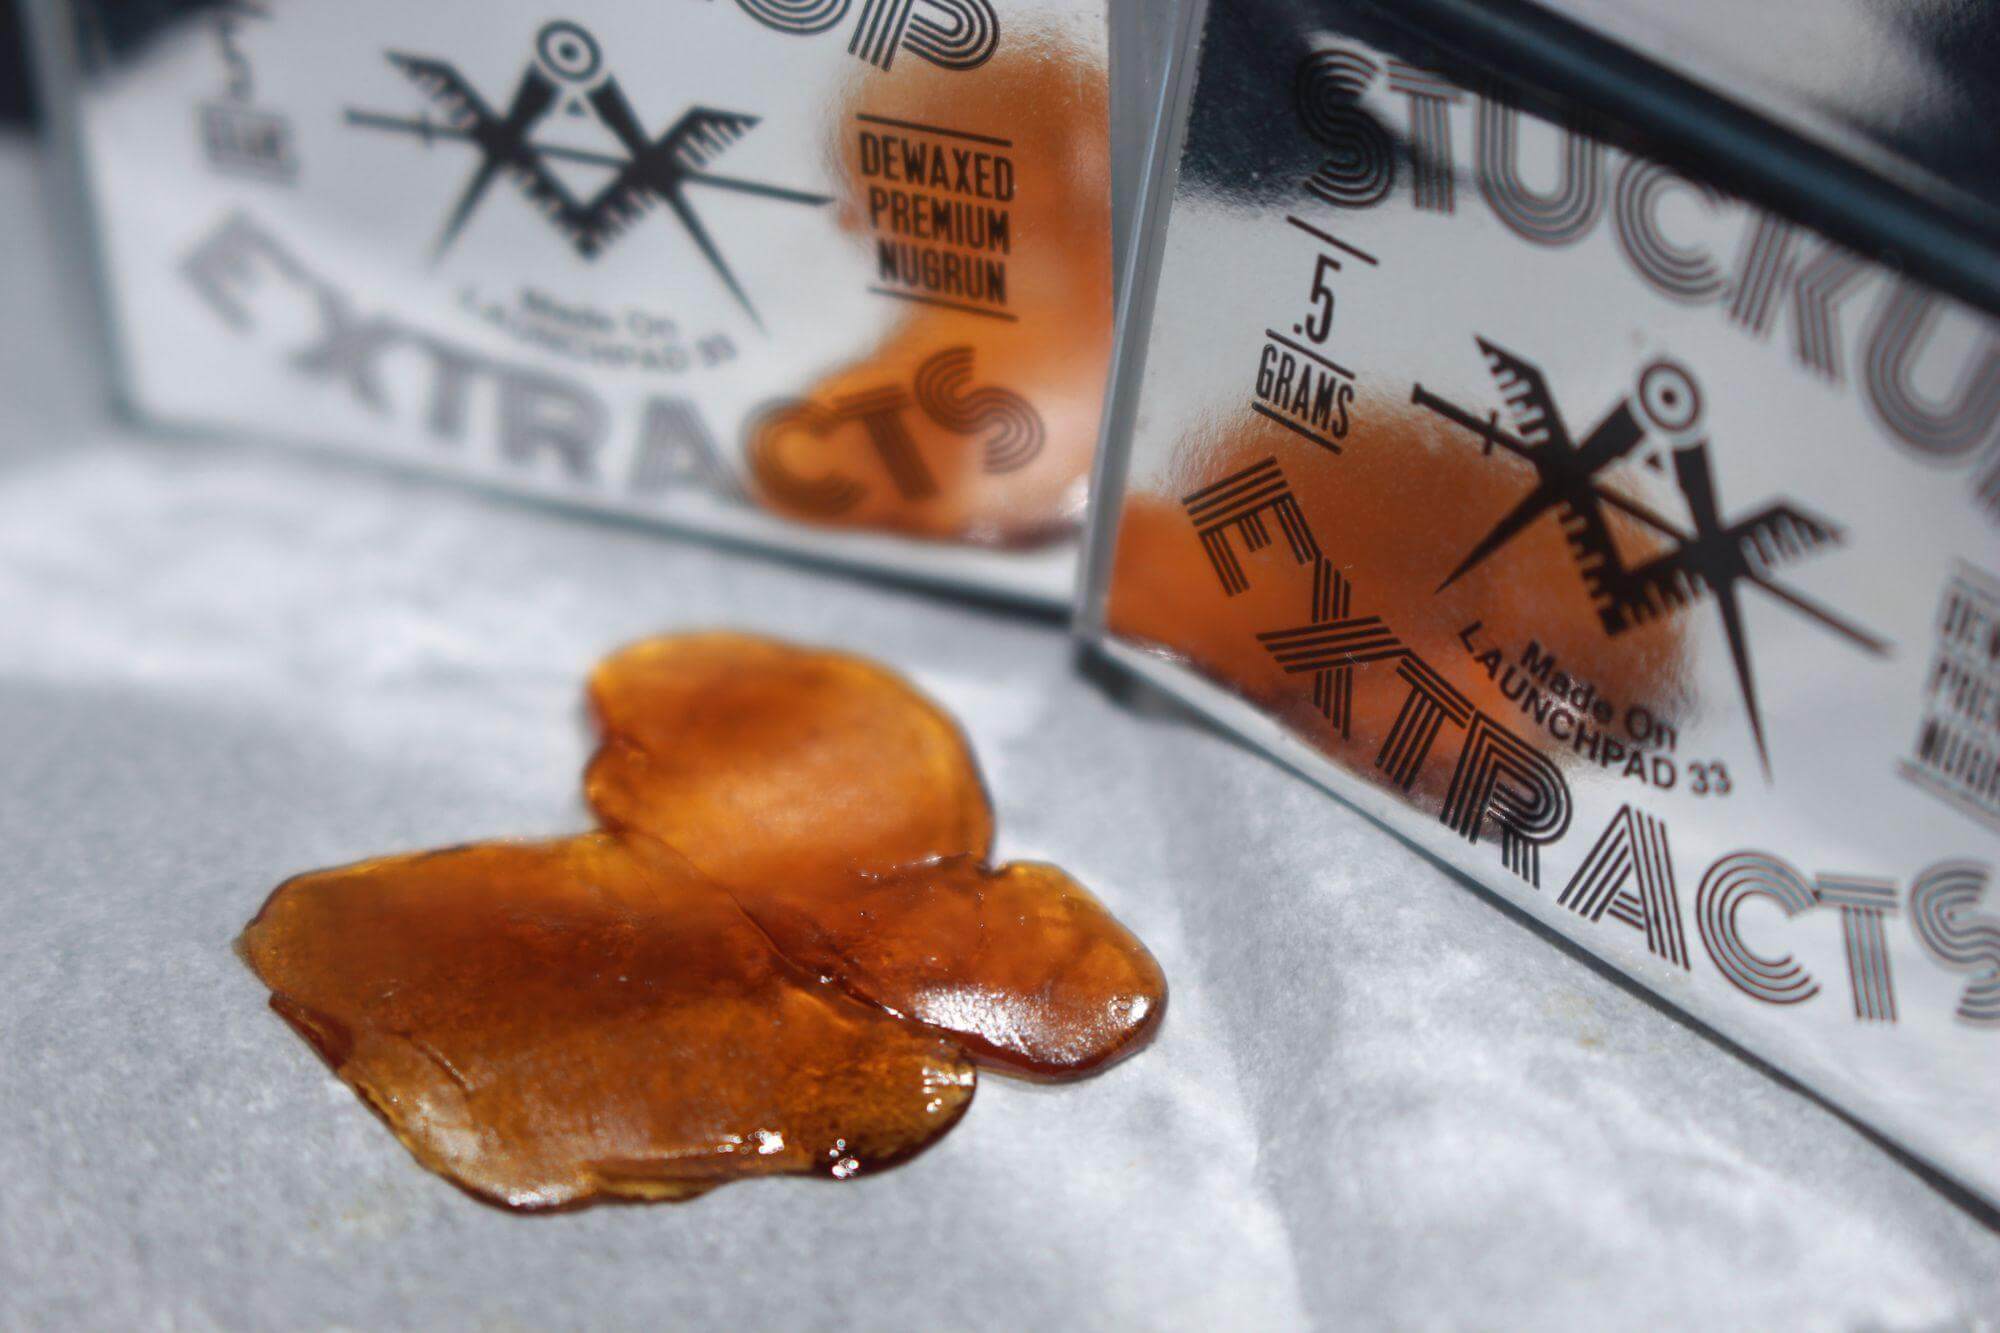 Dabbing Weed: A Guide On How To Get High